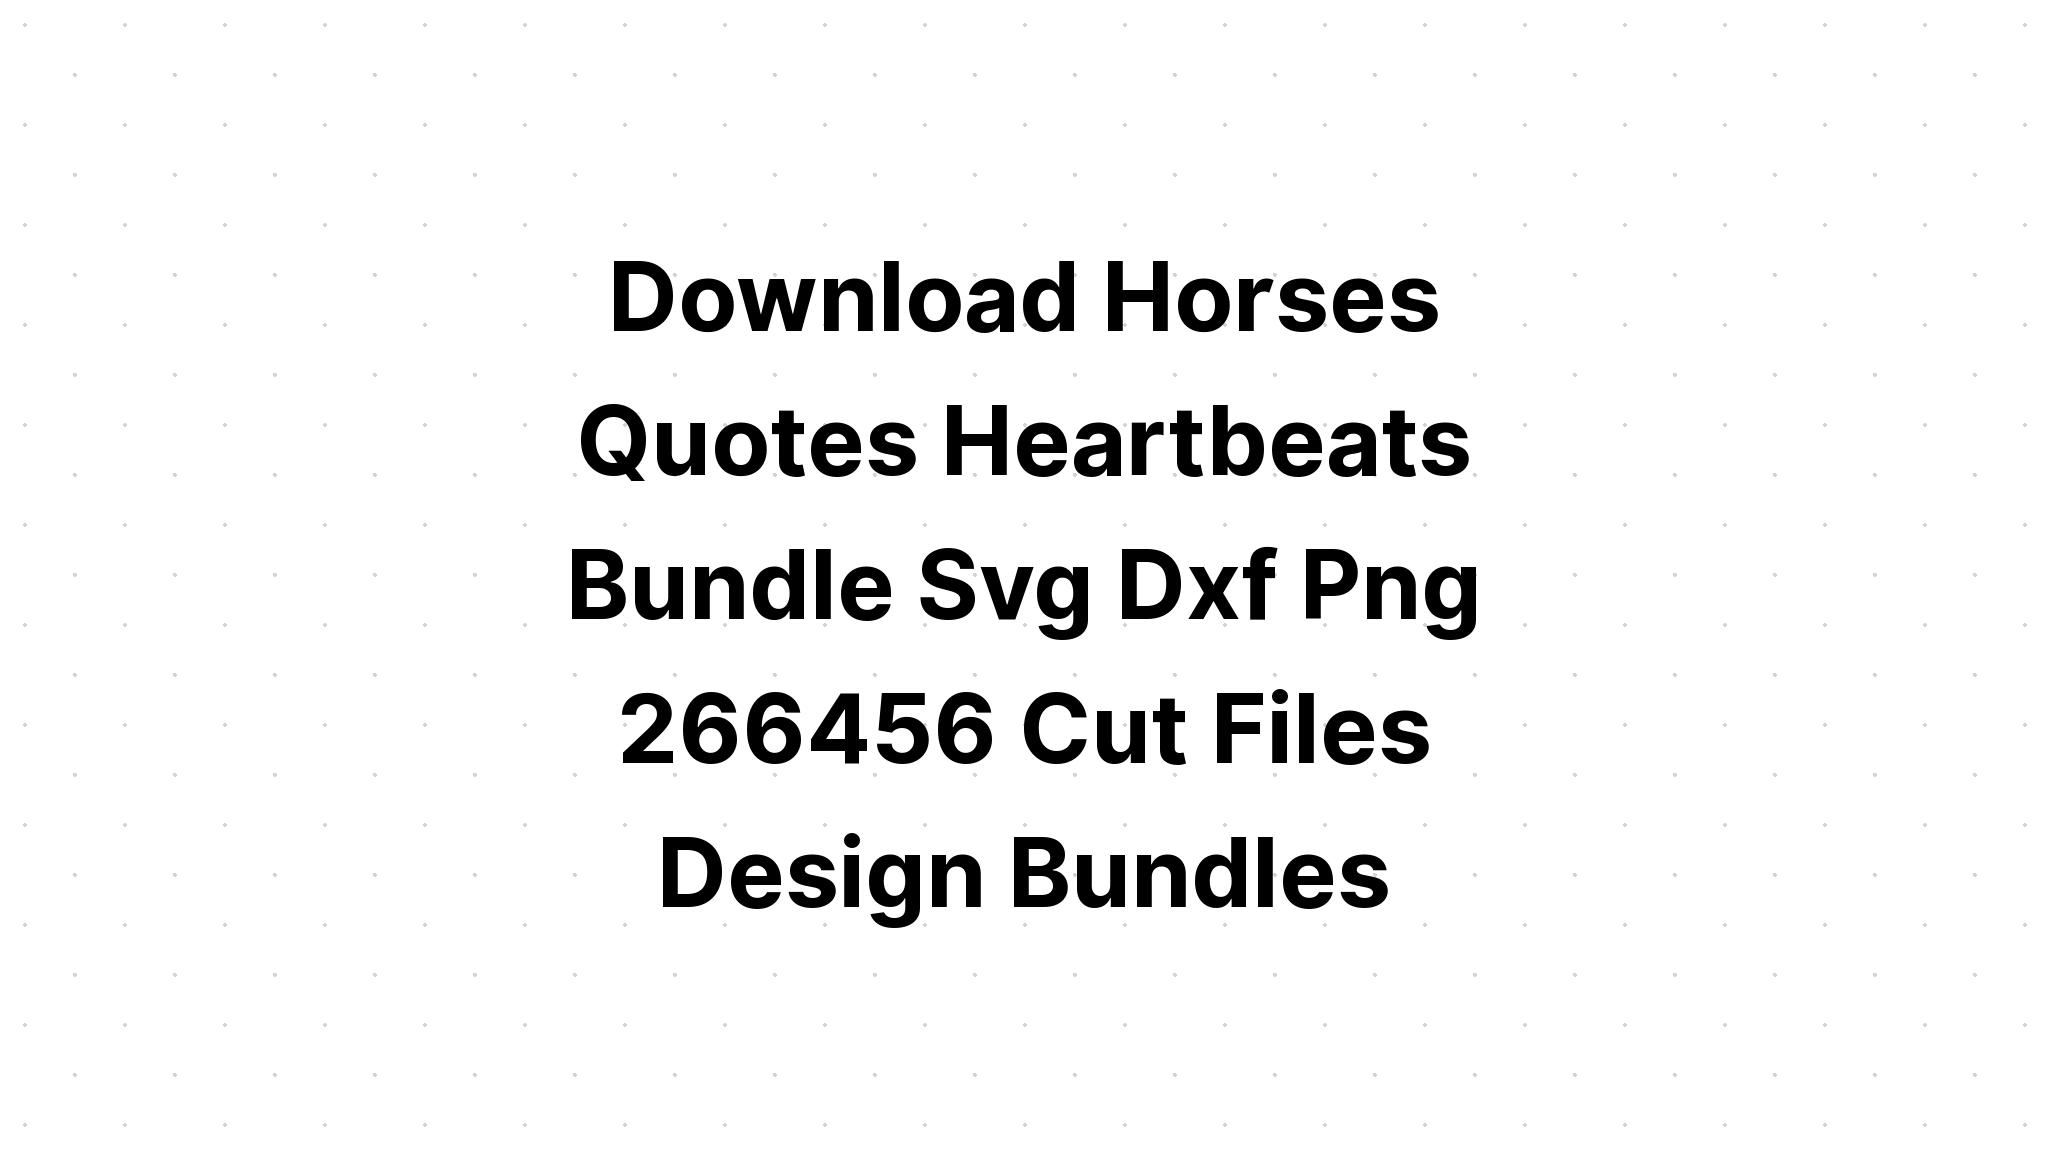 Download Horses Heartbeat SVG File